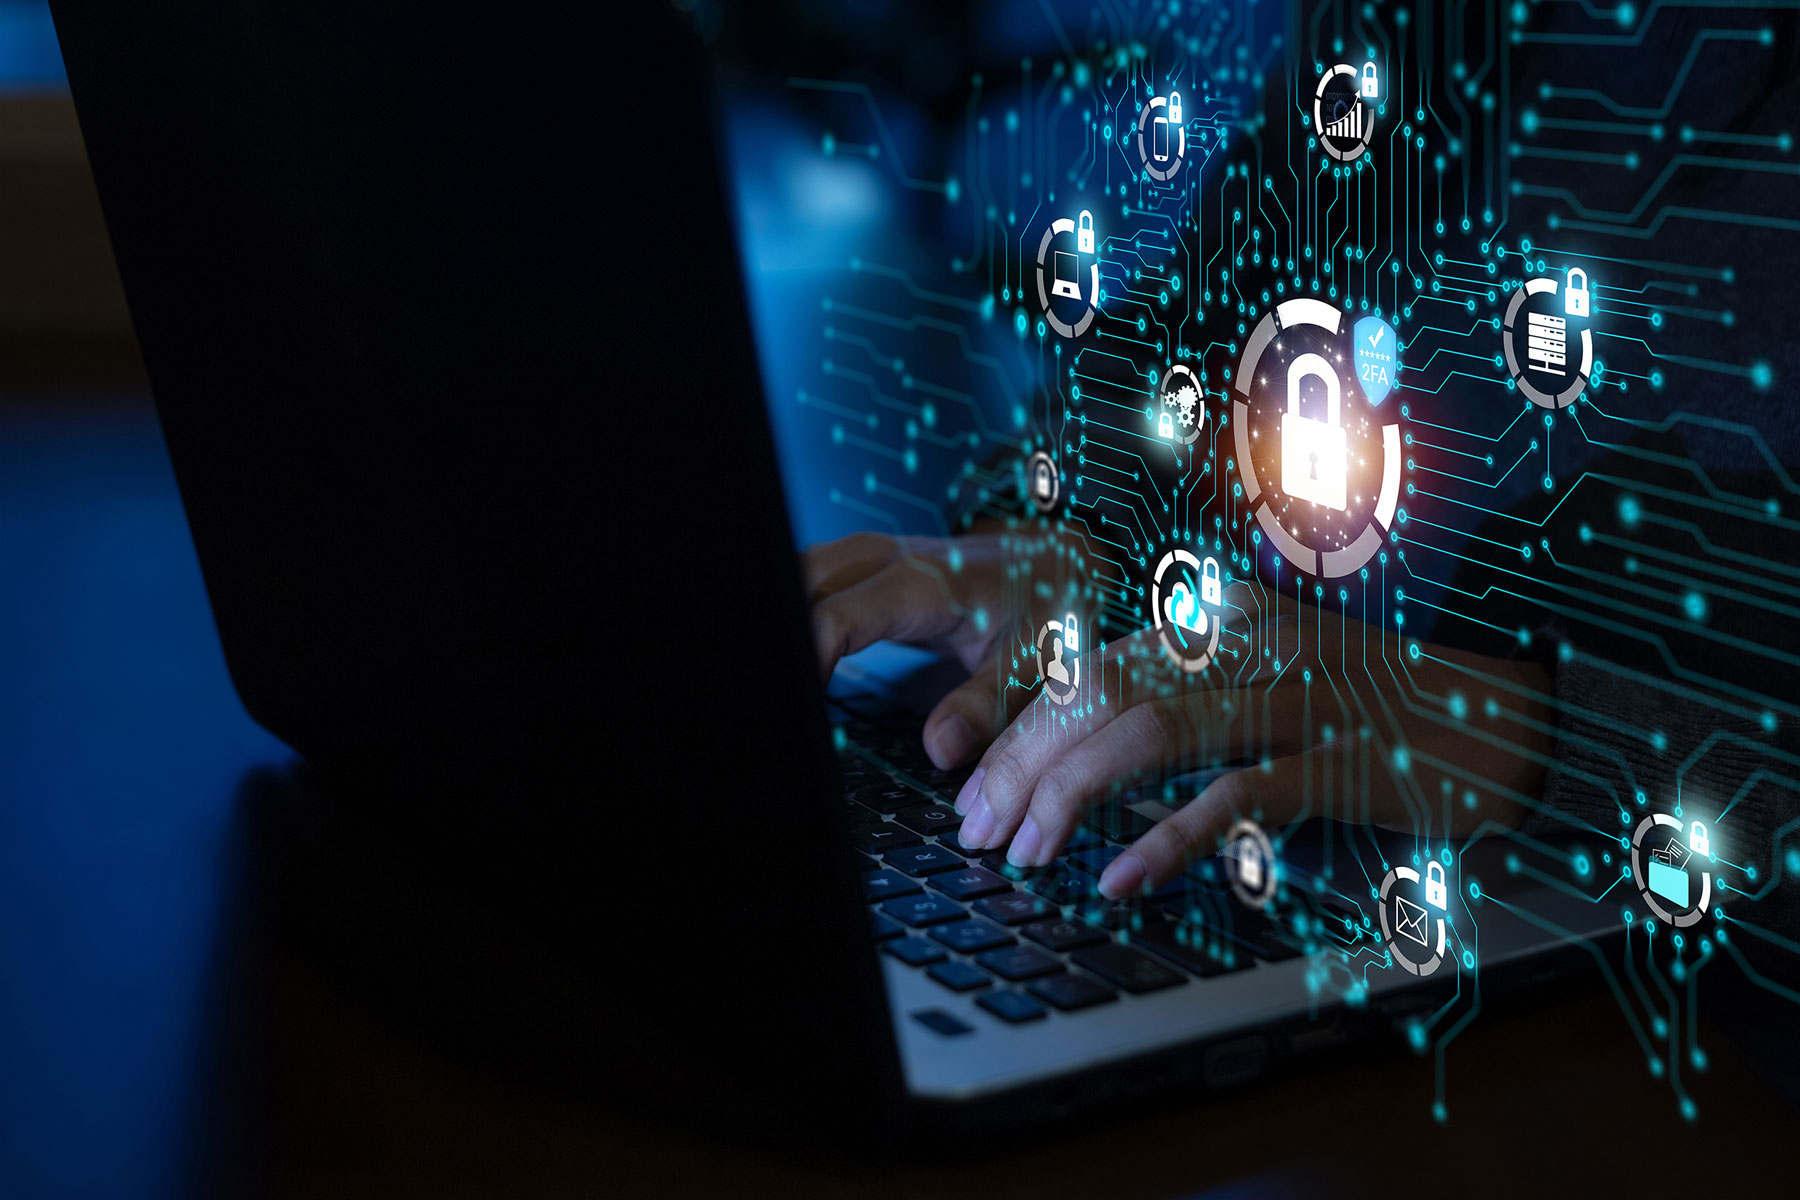 Cybersecurity IT engineers are working on protecting networks from cyber attacks from hackers on the Internet. Secure access to online privacy and personal data protection with 2FA